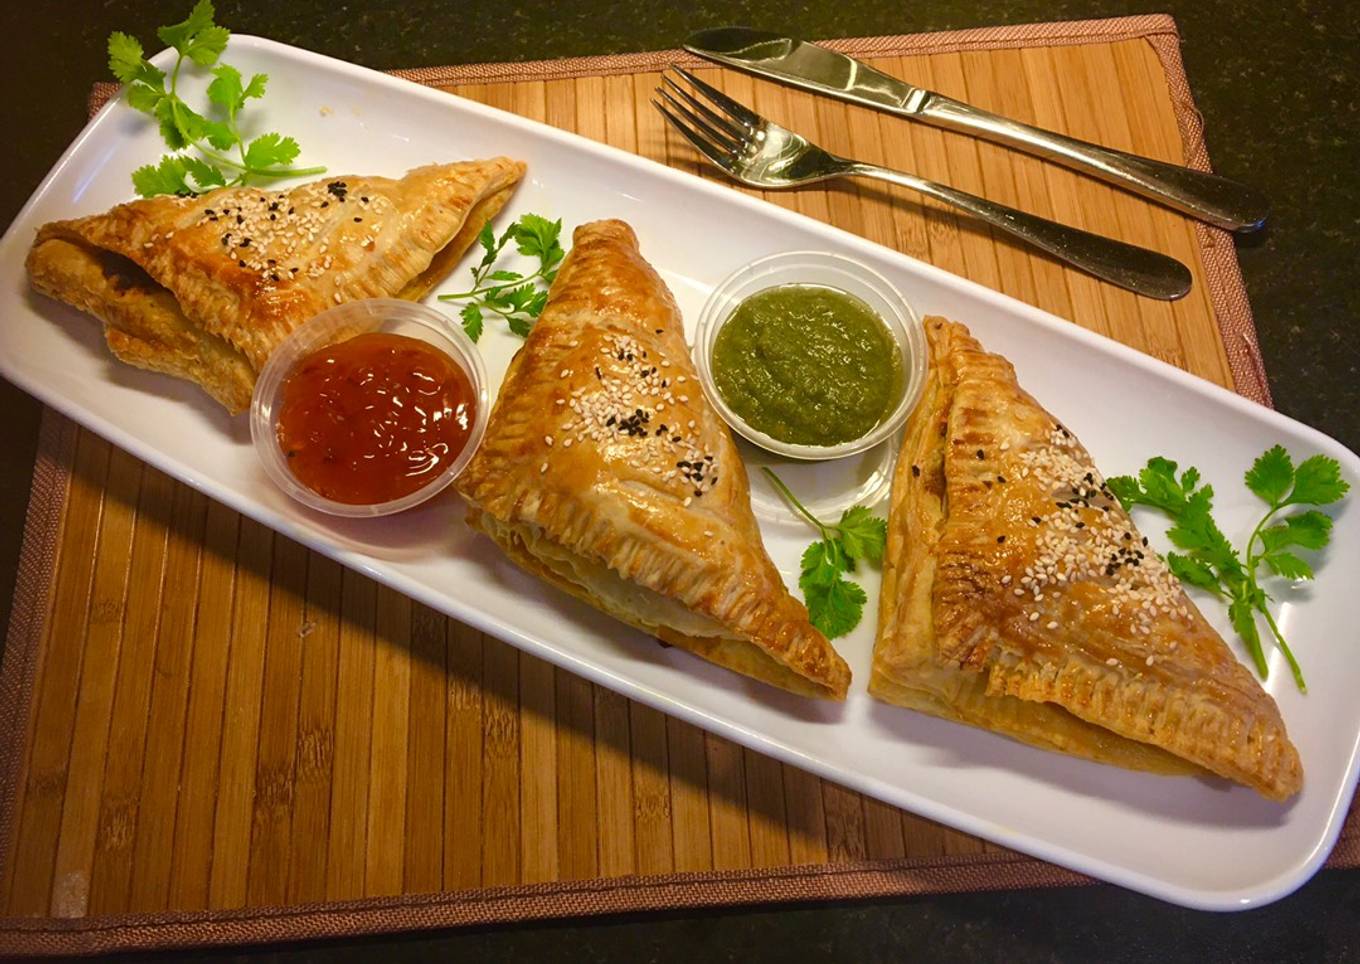 Keema puff pastry: (minced beef puff pastry)